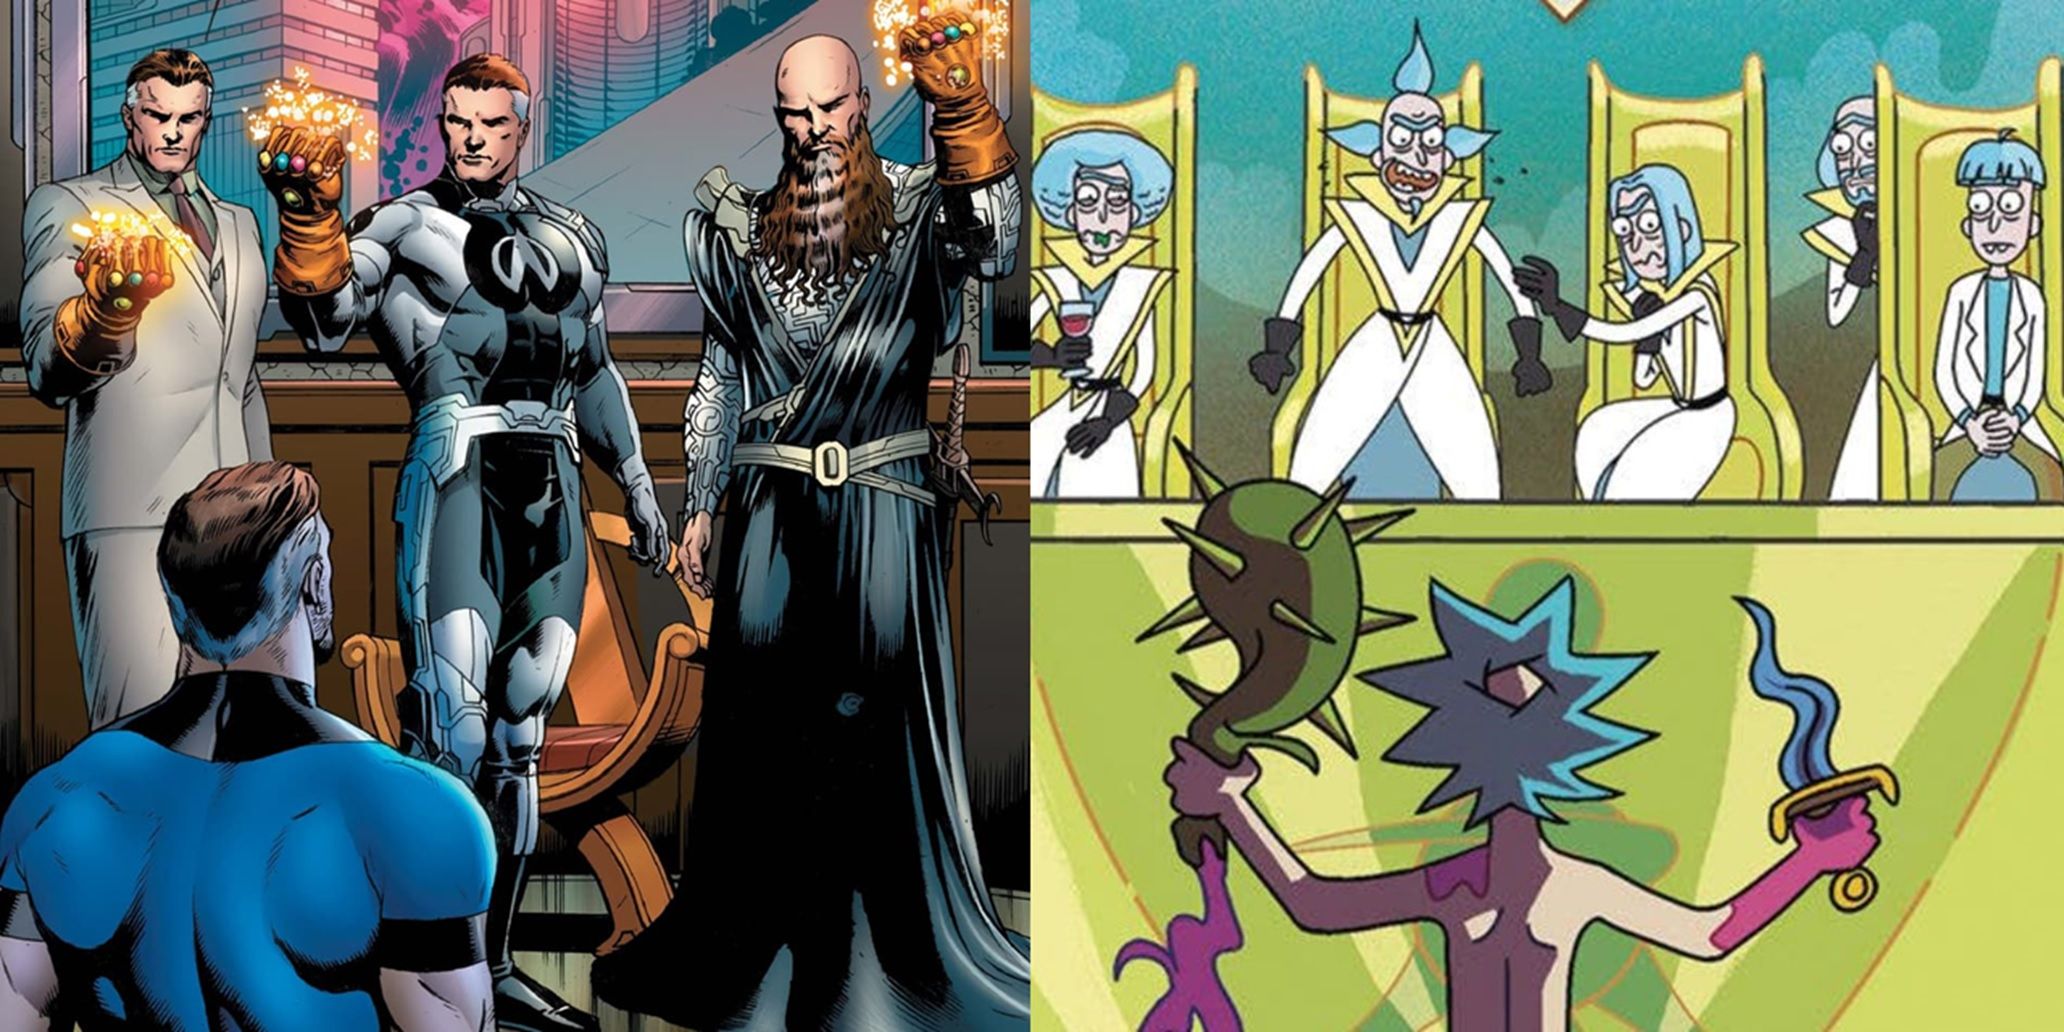 Split image of the Council of Reeds in Marvel Comics and the Council of Ricks in Rick and Morty